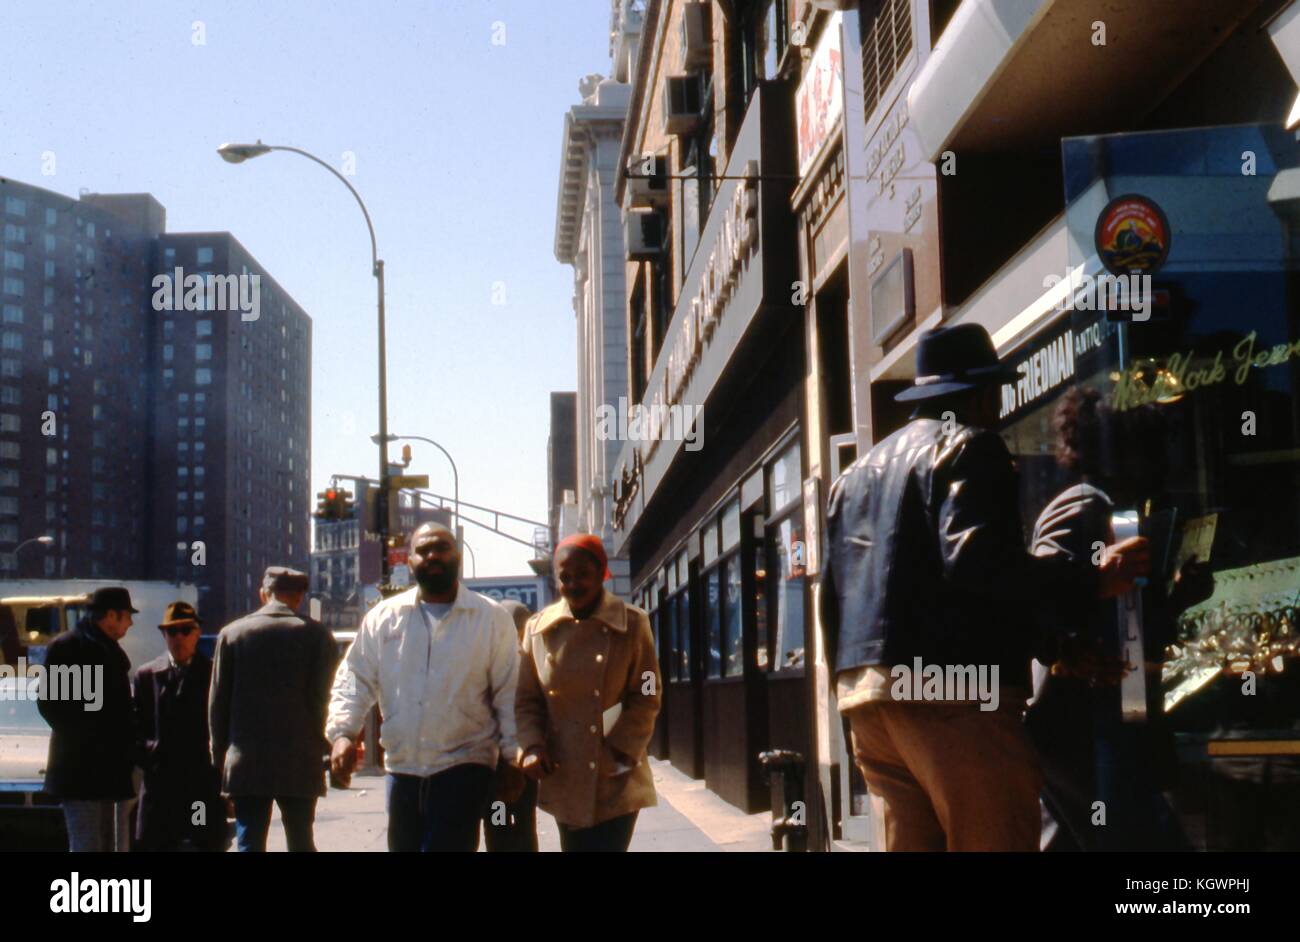 View facing southwest of the corner of Canal Street and The Bowery, in the Chinatown neighborhood of Manhattan, New York City, April, 1979. An African American man and woman walk north on the sidewalk past the New York Jewelry Exchange at 70-74 Bowery. () Stock Photo